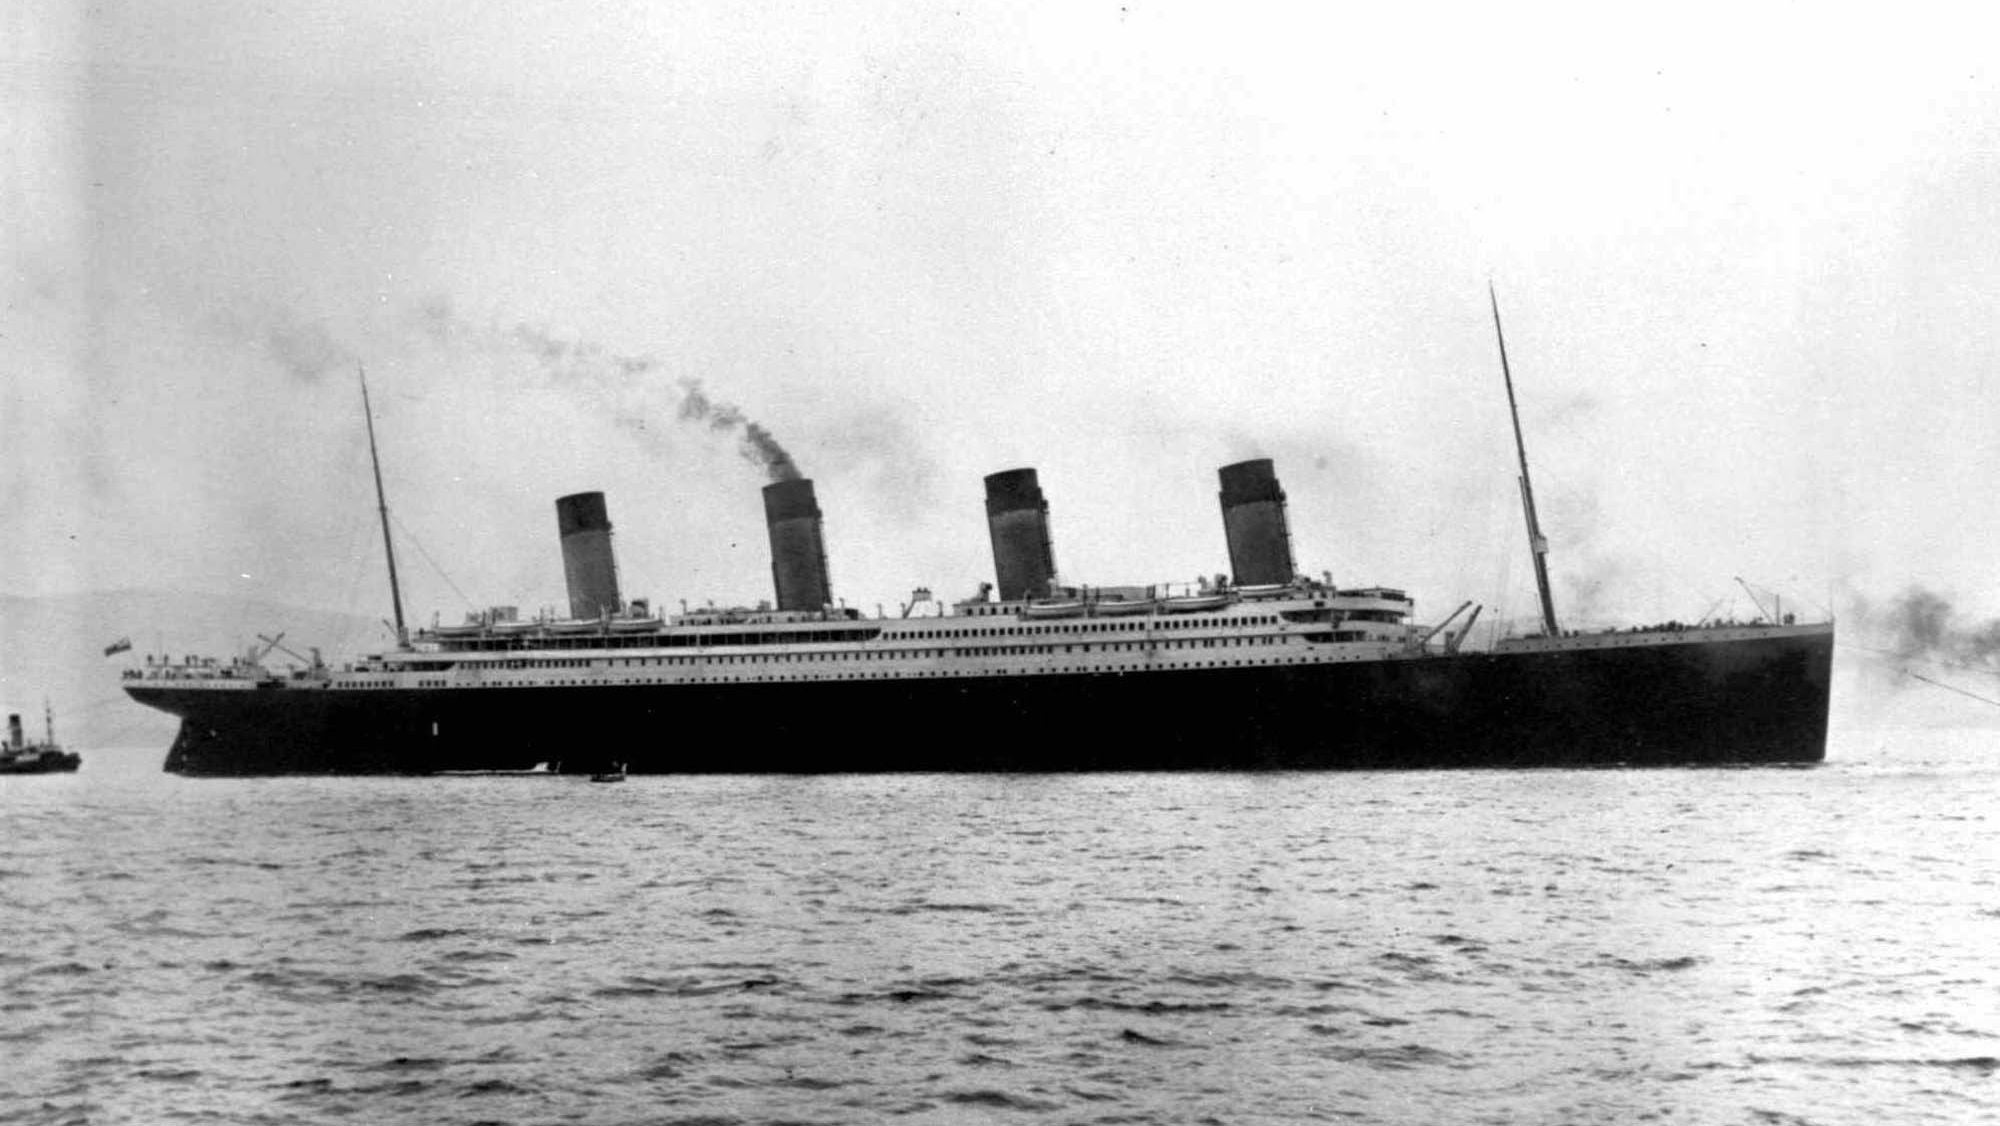 The Woman Who Survived the Titanic, Britannic, and Olympic Disasters